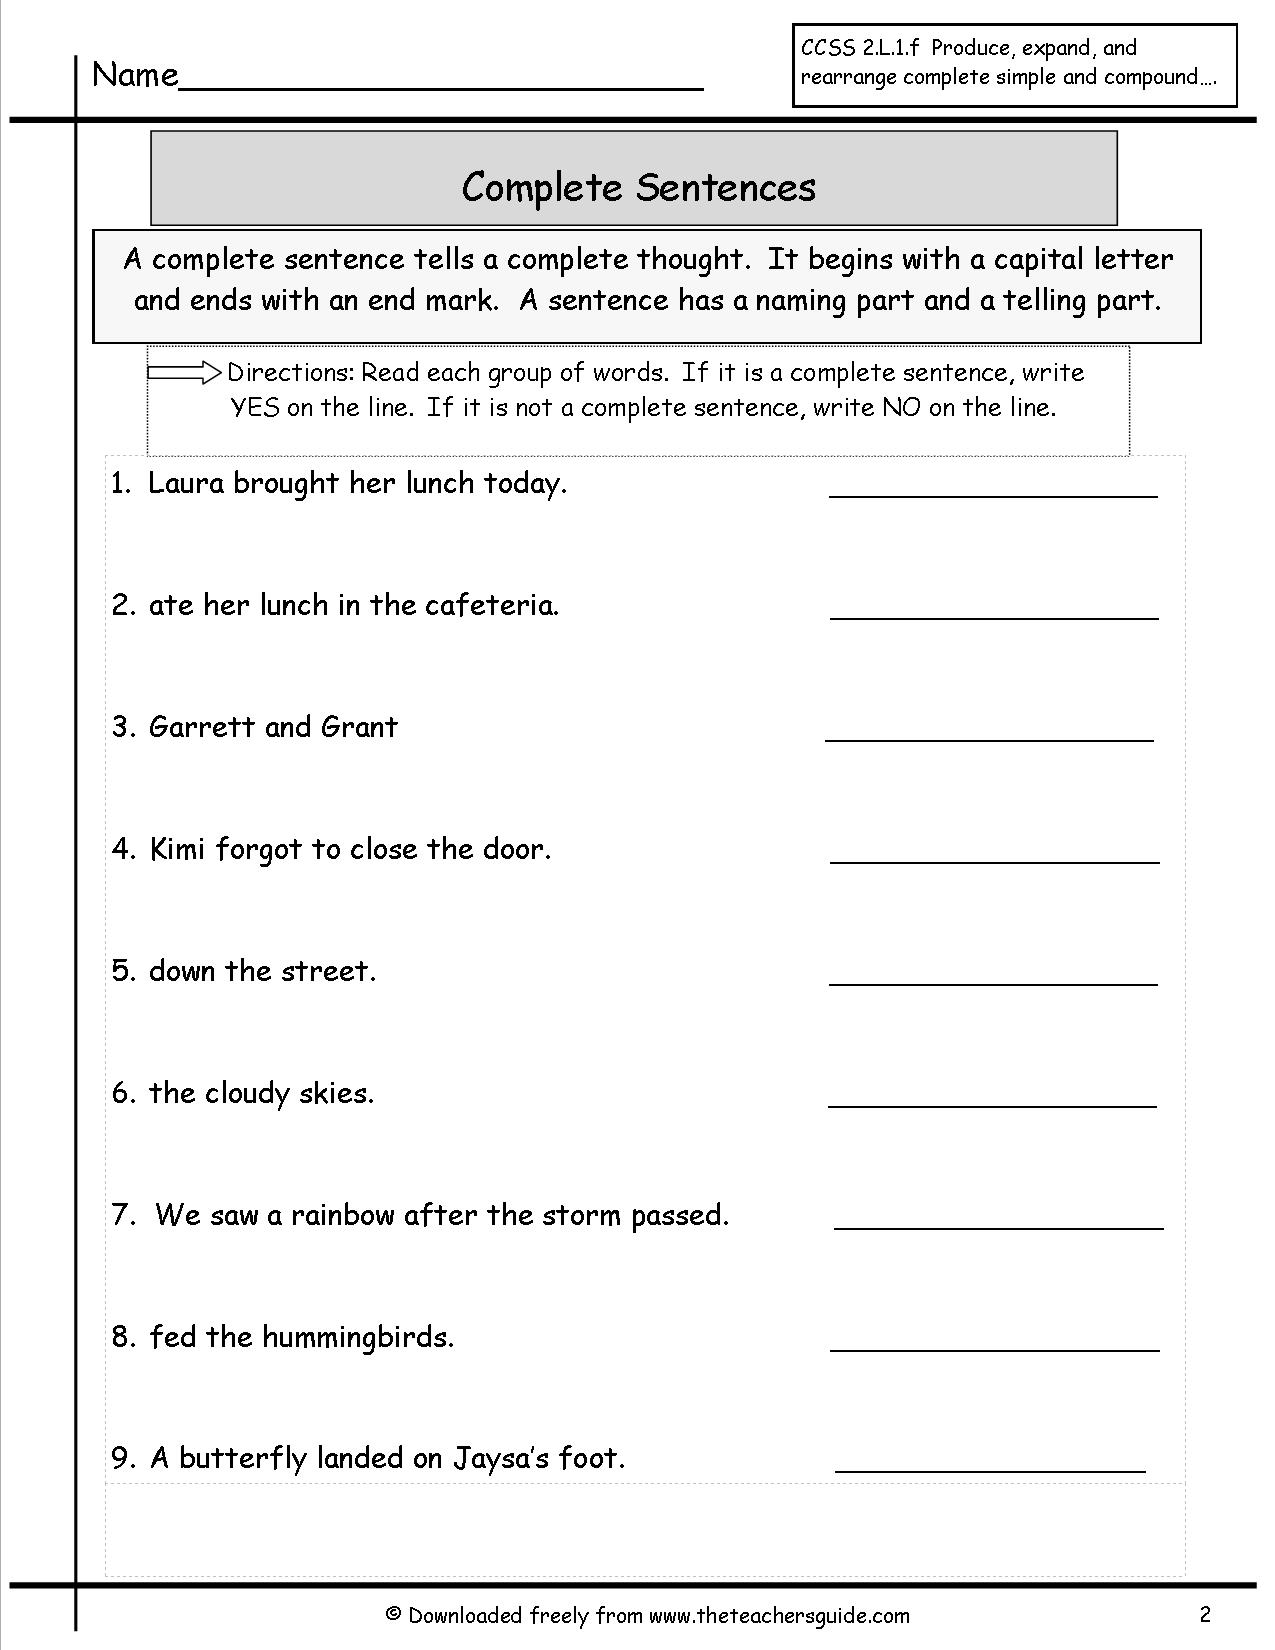 rearrange-the-following-words-phrases-to-form-meaningful-sentences-1040-tax-form